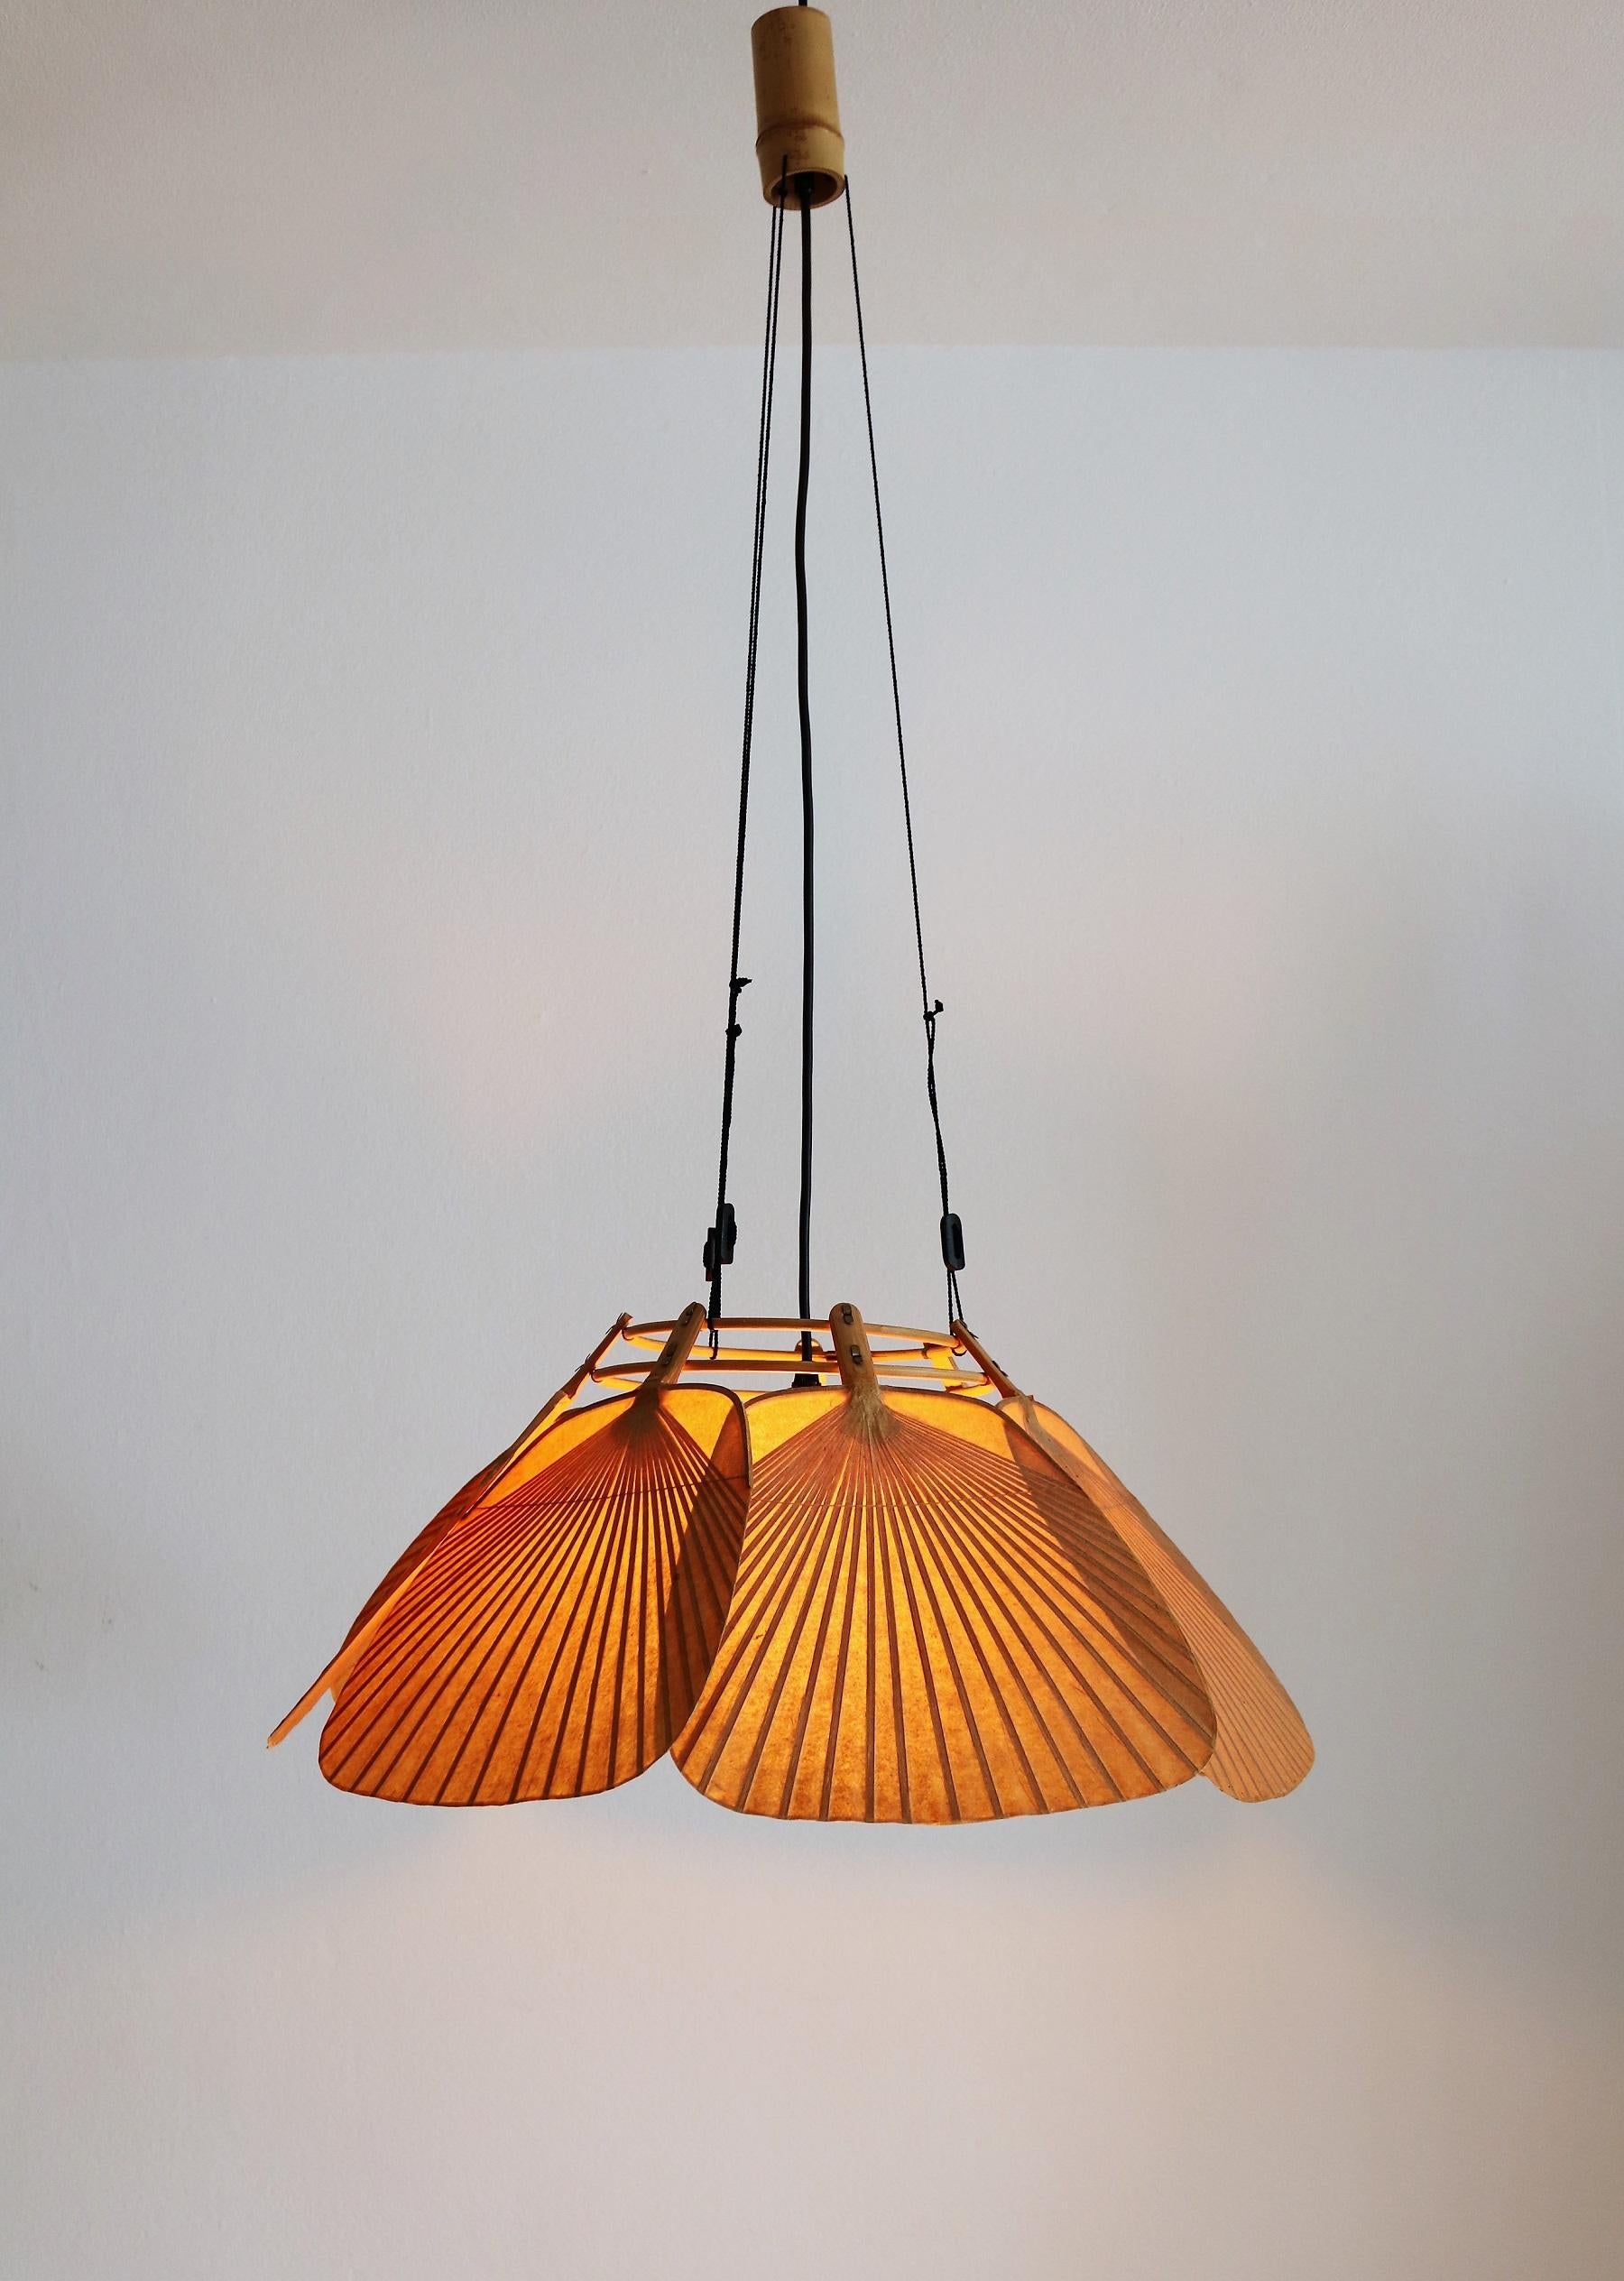 Beautiful and rare lamp named Shichi made of seven delicate fans which are made of bamboo and rice paper, designed from Ingo Maurer, 1973.
It makes beautiful natural light, depending also from the used light bulb.
The seven fans are attached with